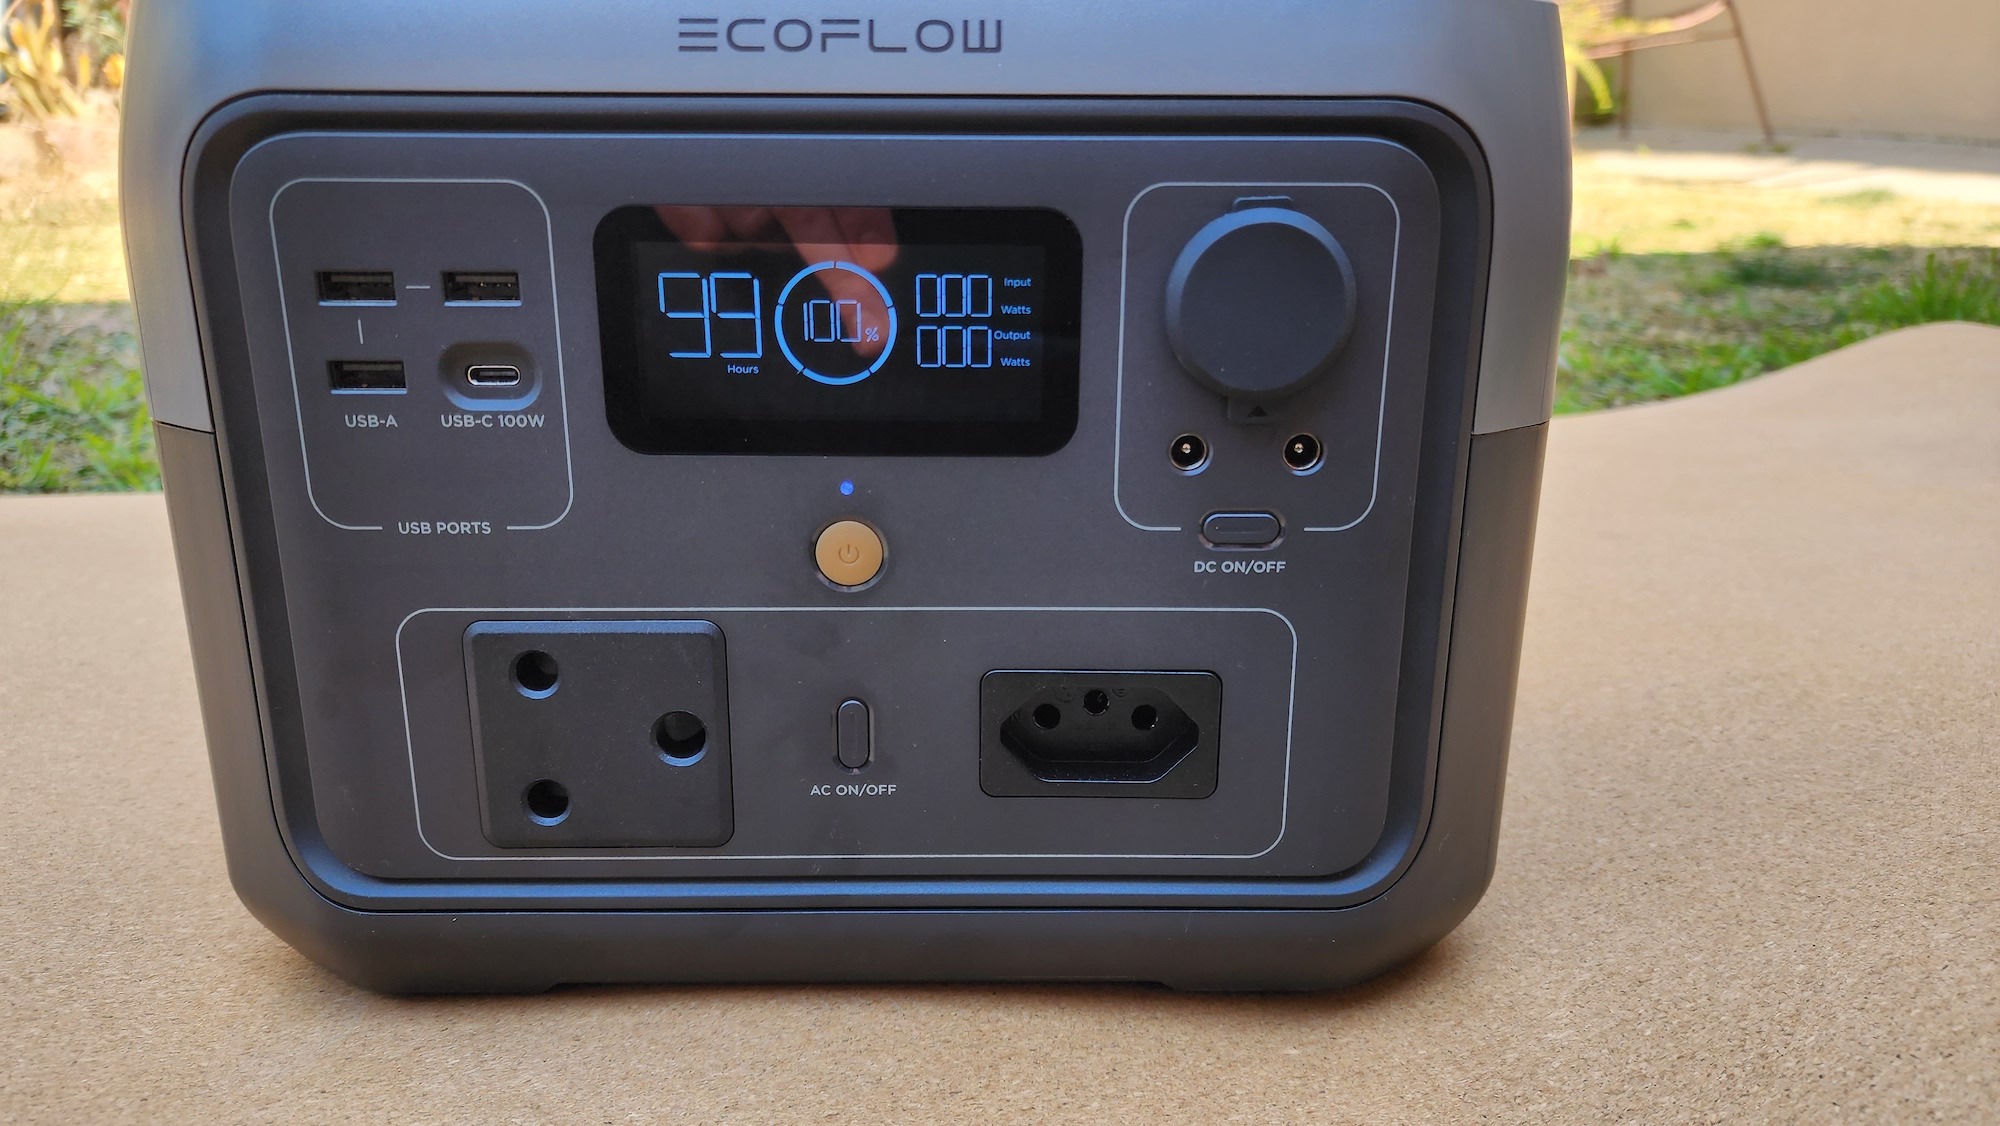 Ecoflow River 2 Max Power Station Review - This River Runs Through It -  Stuff South Africa